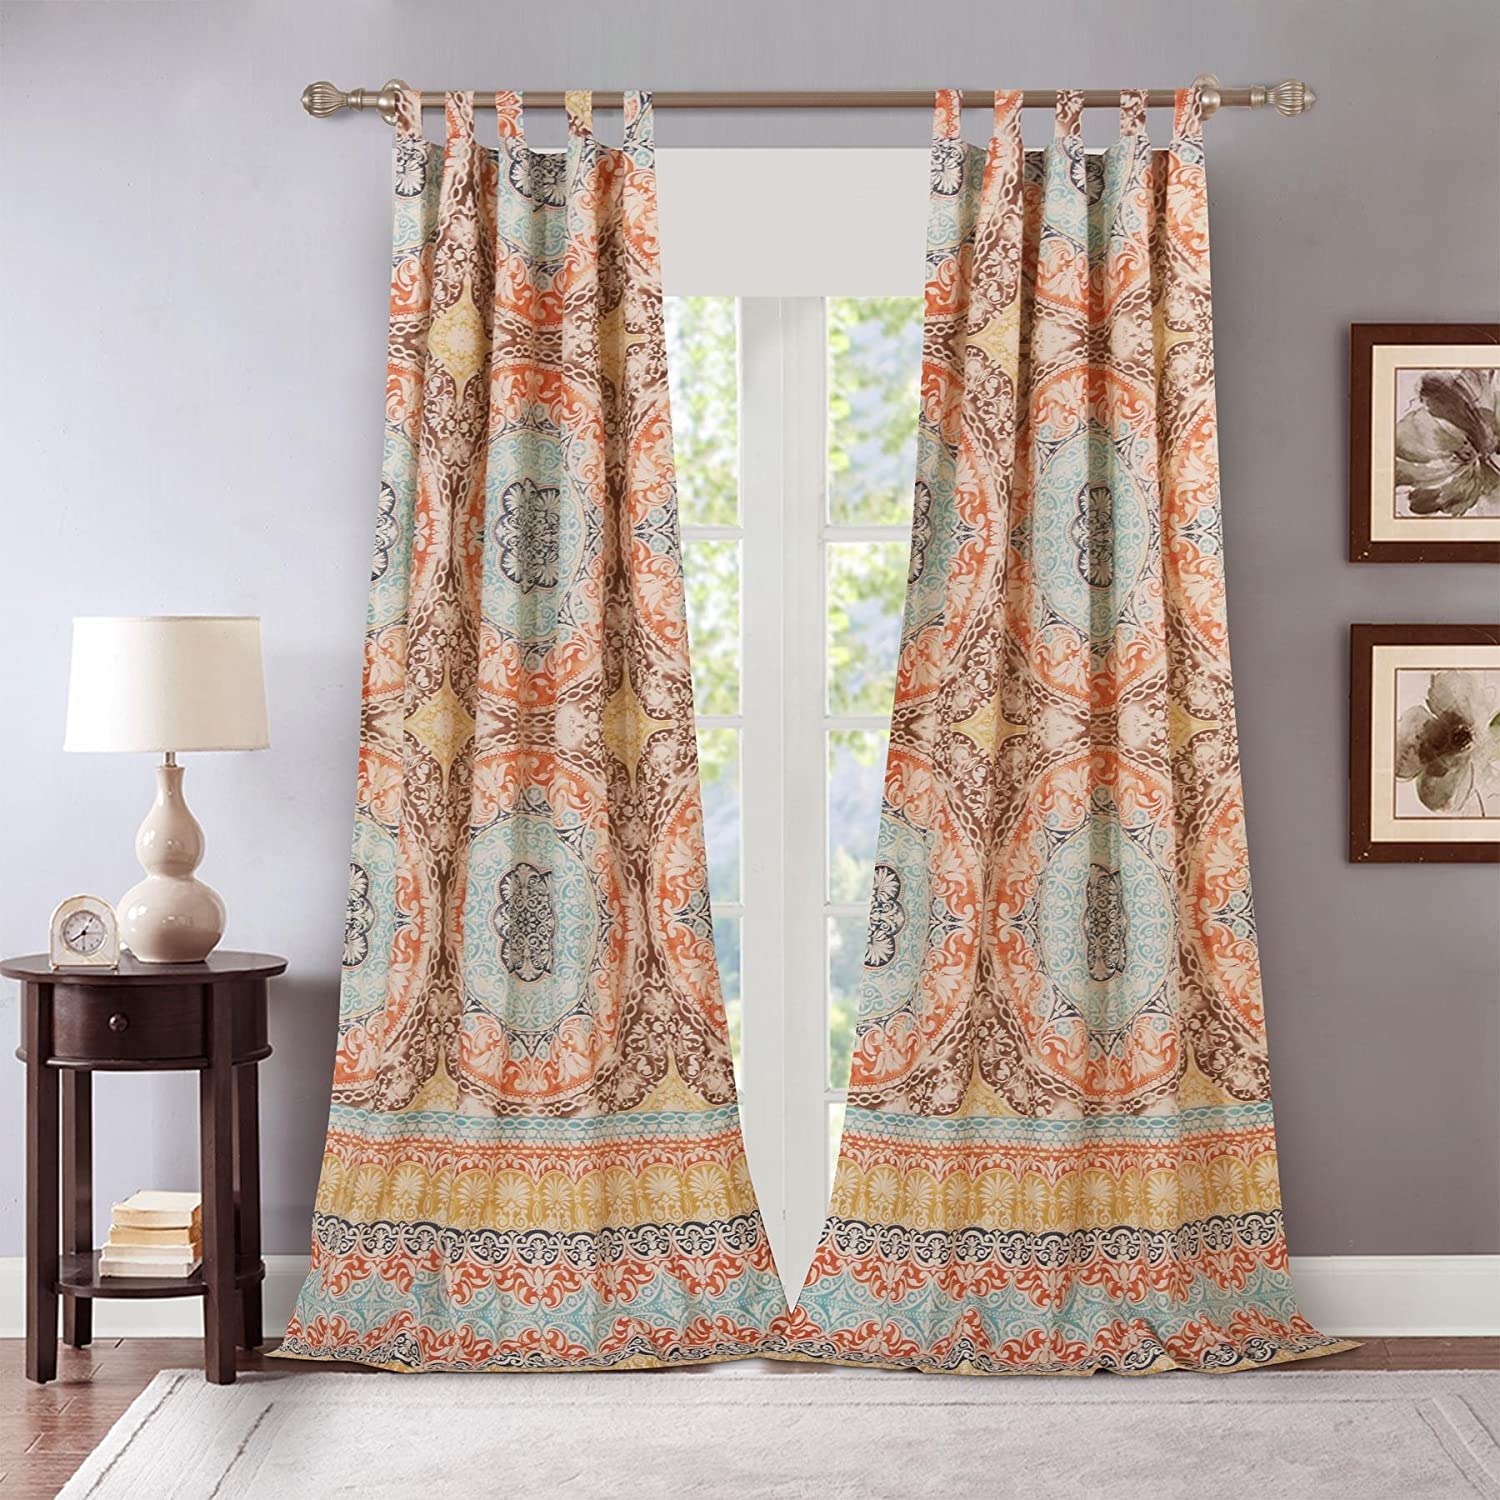 Barefoot Bungalow Olympia Curtain Panels